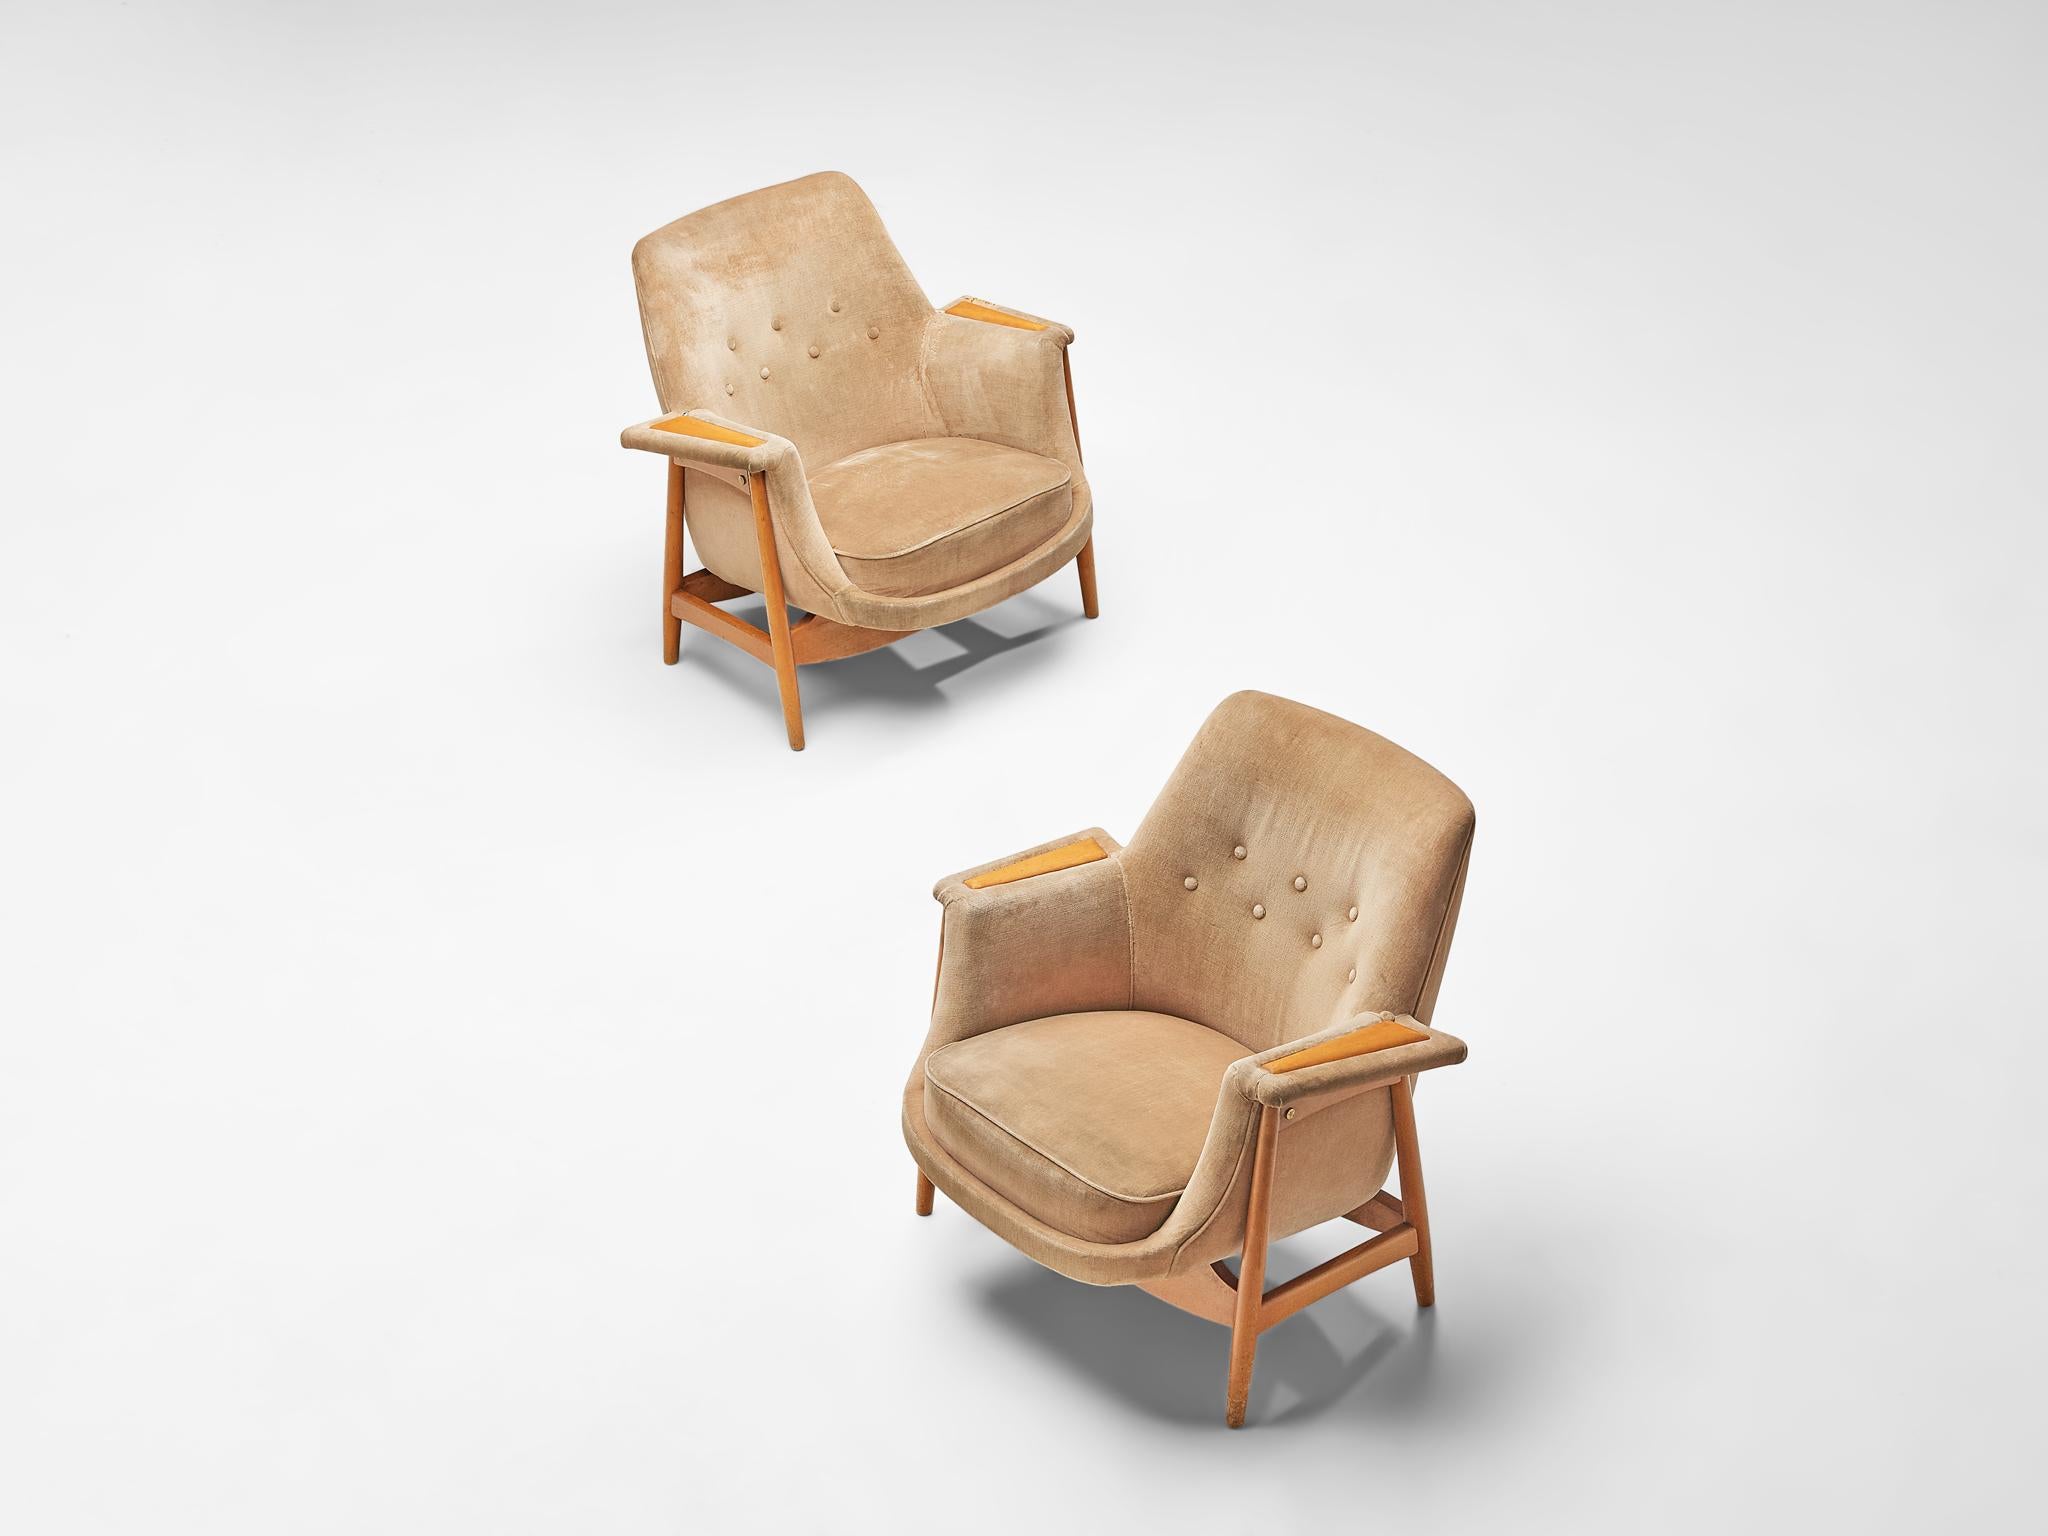 Pair of lounge chairs, wood, velvet, Europe, 1970s.

The construction and usefulness of this pair of lounge chairs is well thought out by the designer, resulting in this sophisticated shape. For instance, the armrests are slightly curved outwards